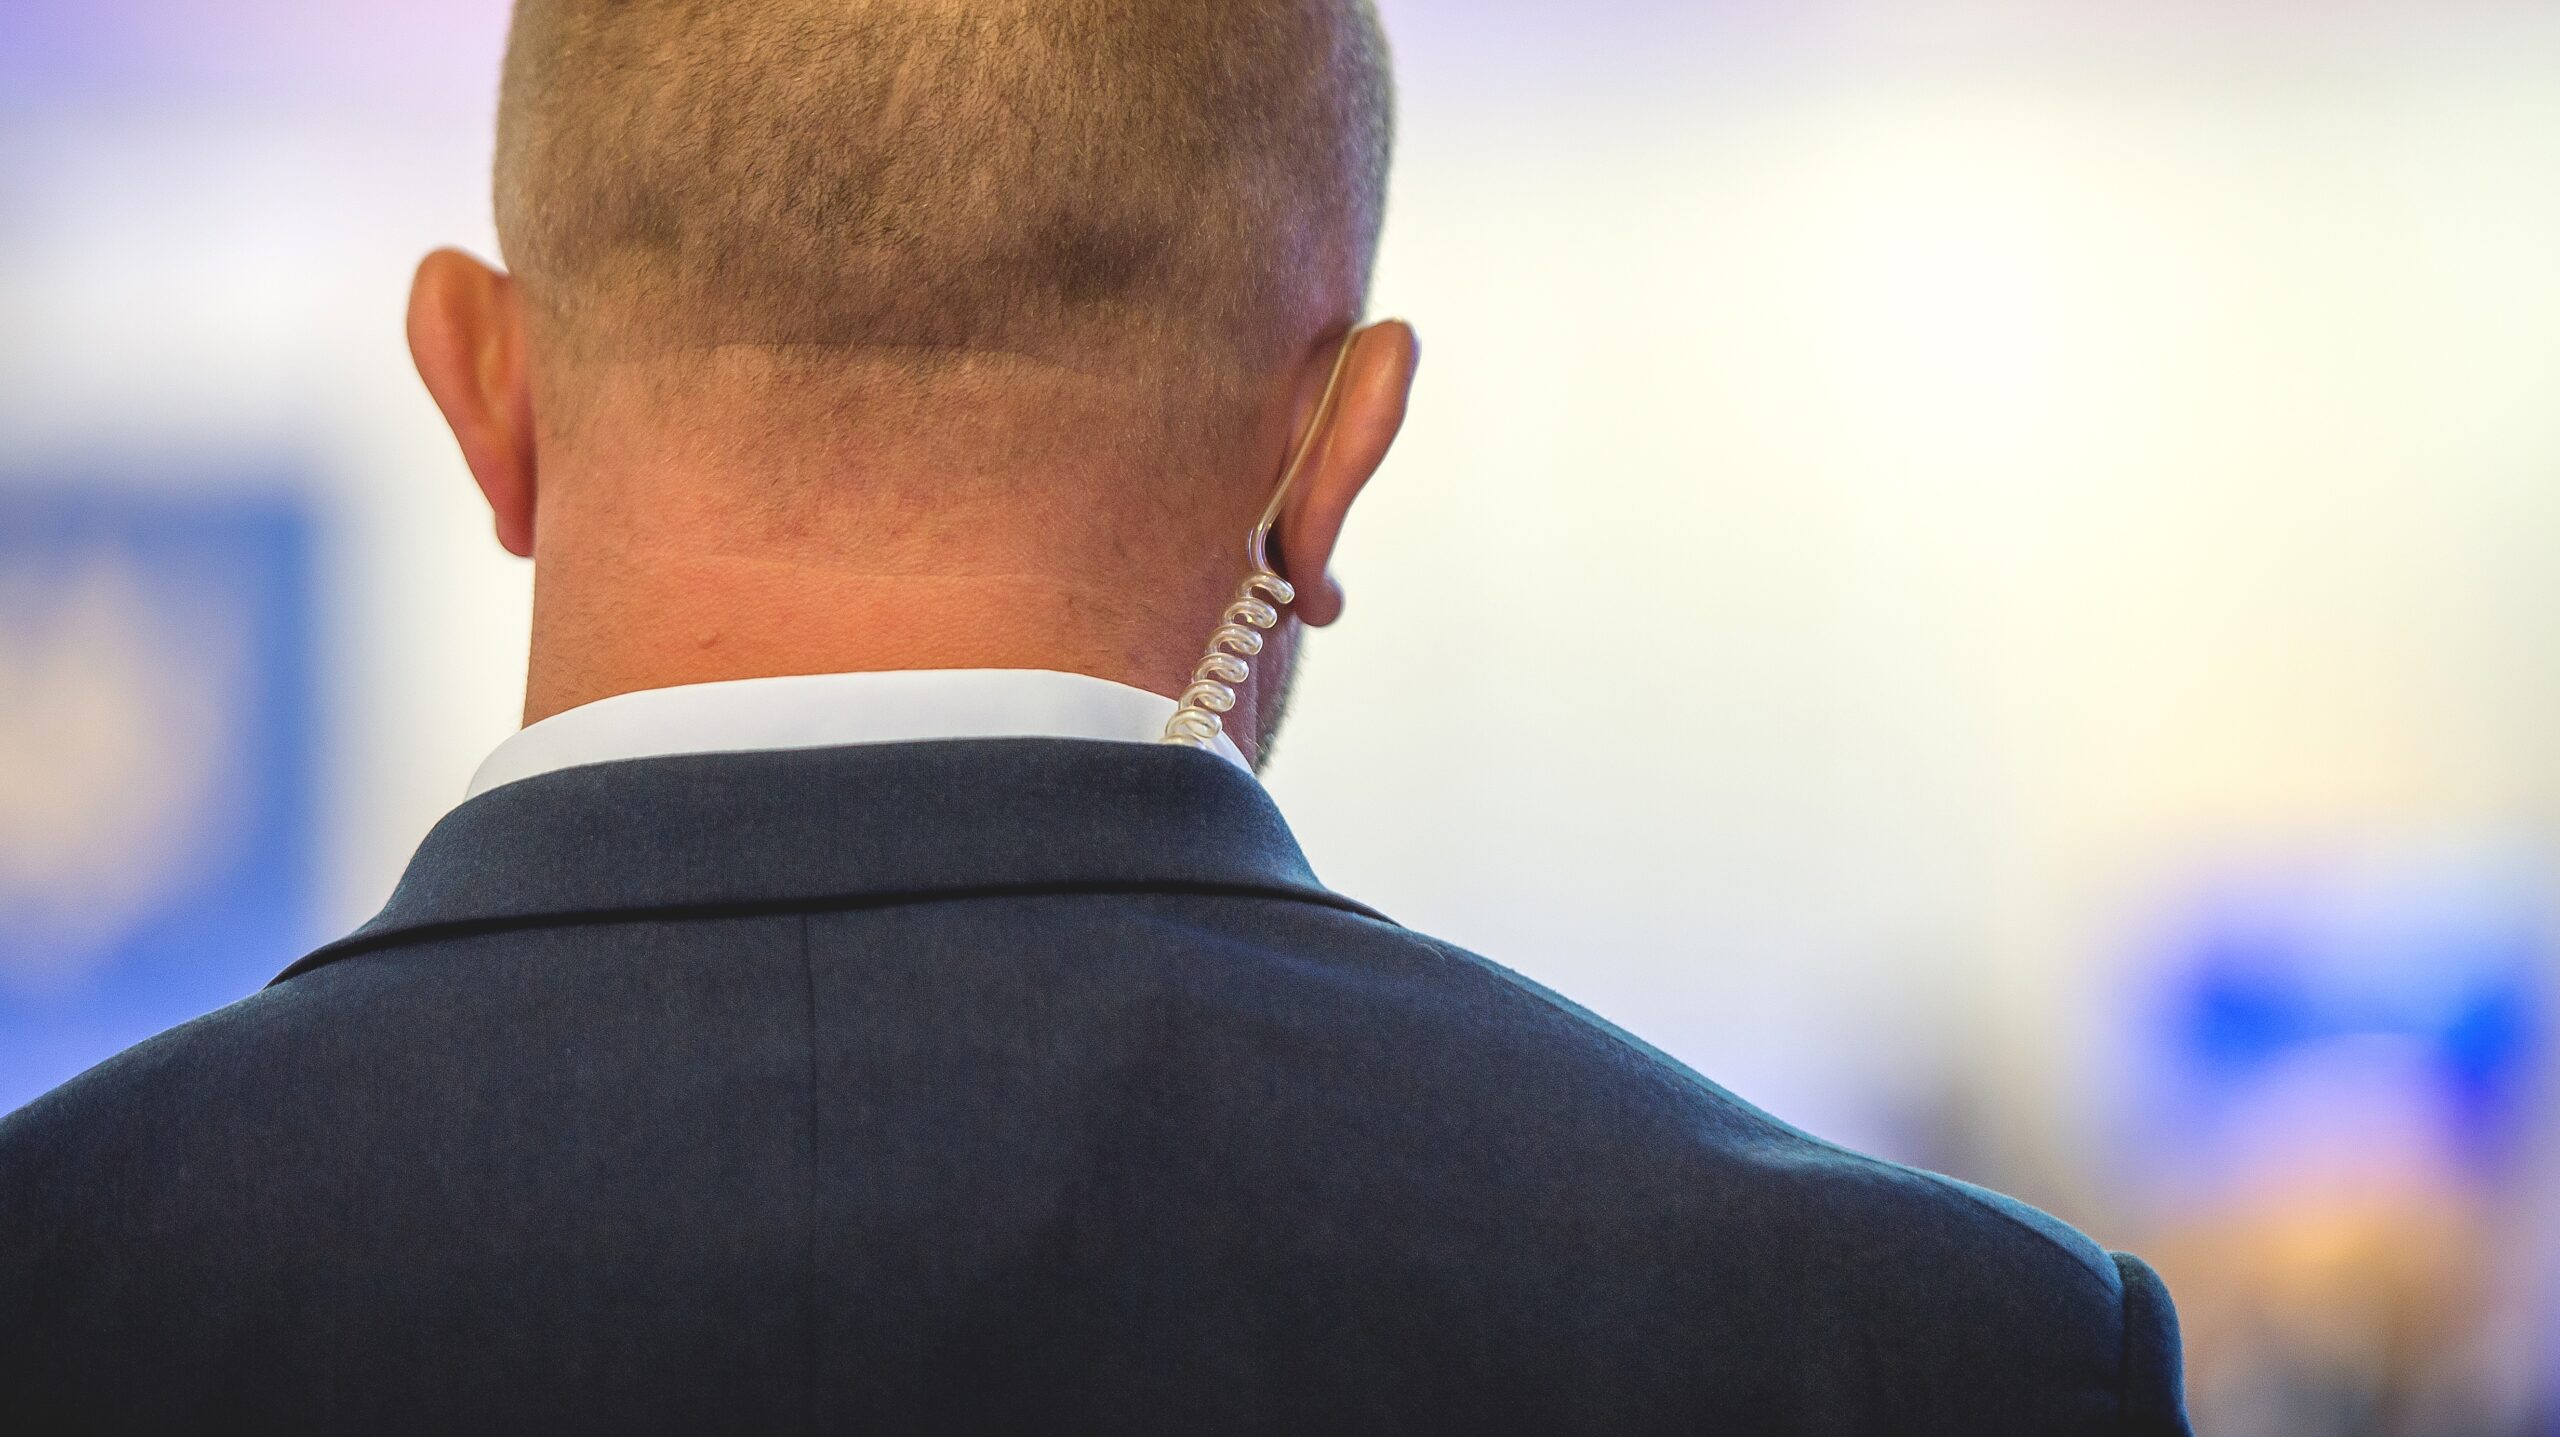 A security agent from Global Risk Solutions, Inc. with an earpiece, showcasing professionalism and readiness to act, symbolizing elite executive protection services.